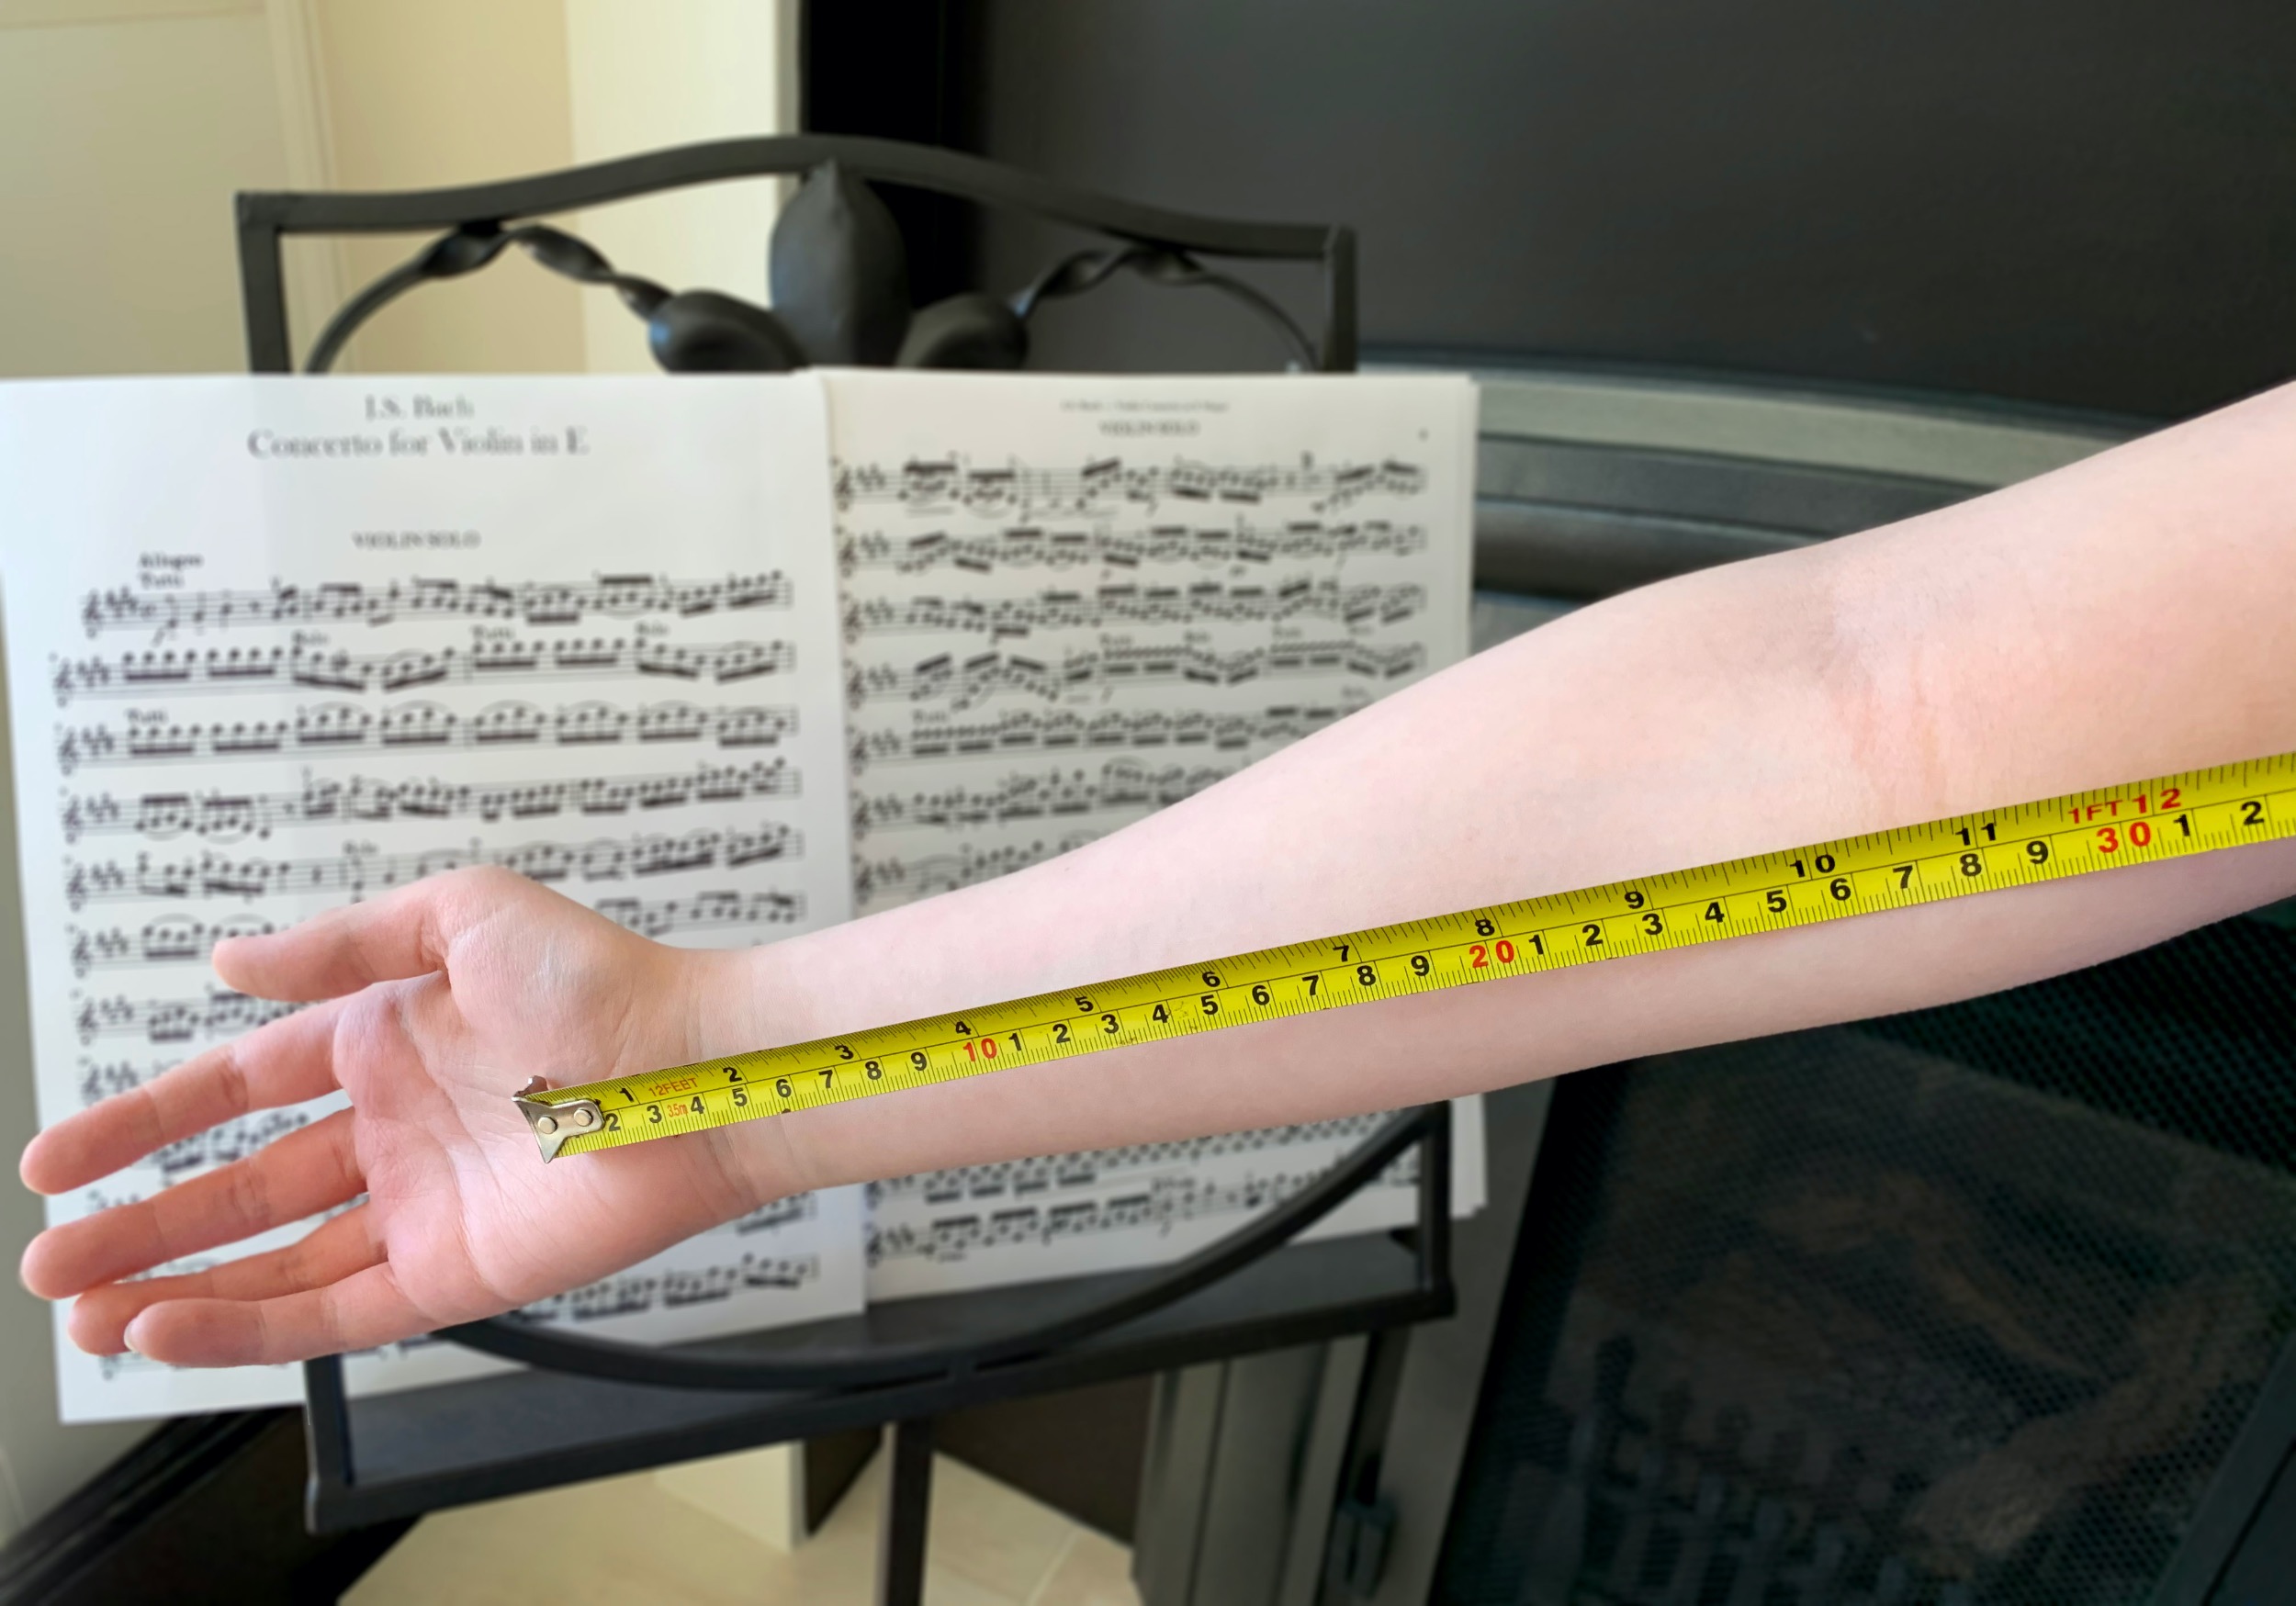 Child's arm extended with a yellow measuring tape and a music stand with Bach sheet music in the background